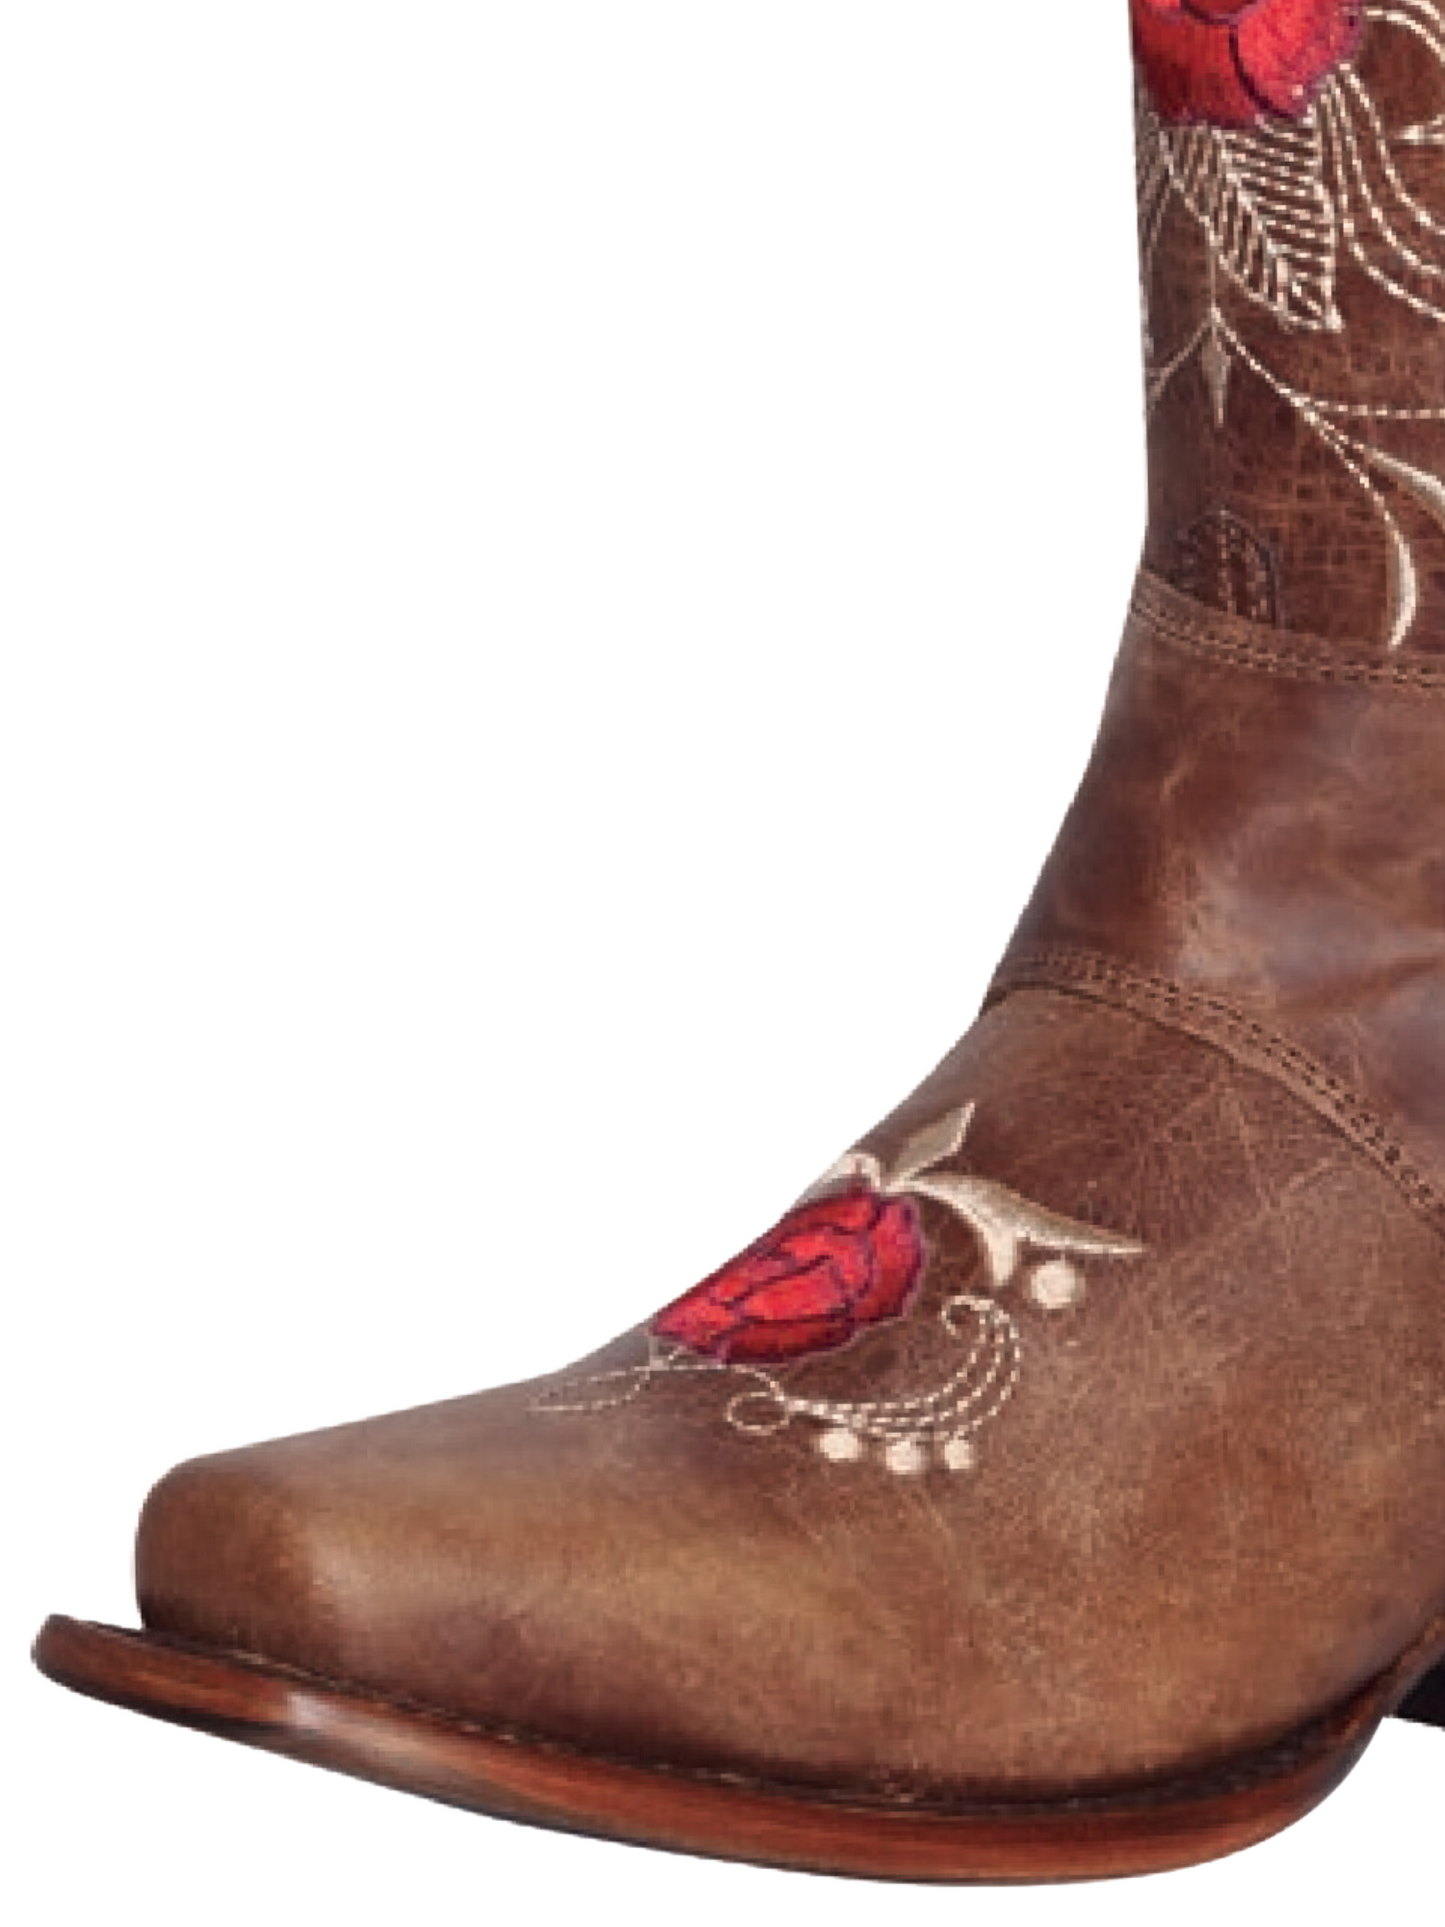 Rodeo Harness Cowboy Boots with Embroidered Genuine Leather Flower Tube for Women 'El General' - ID: 41783